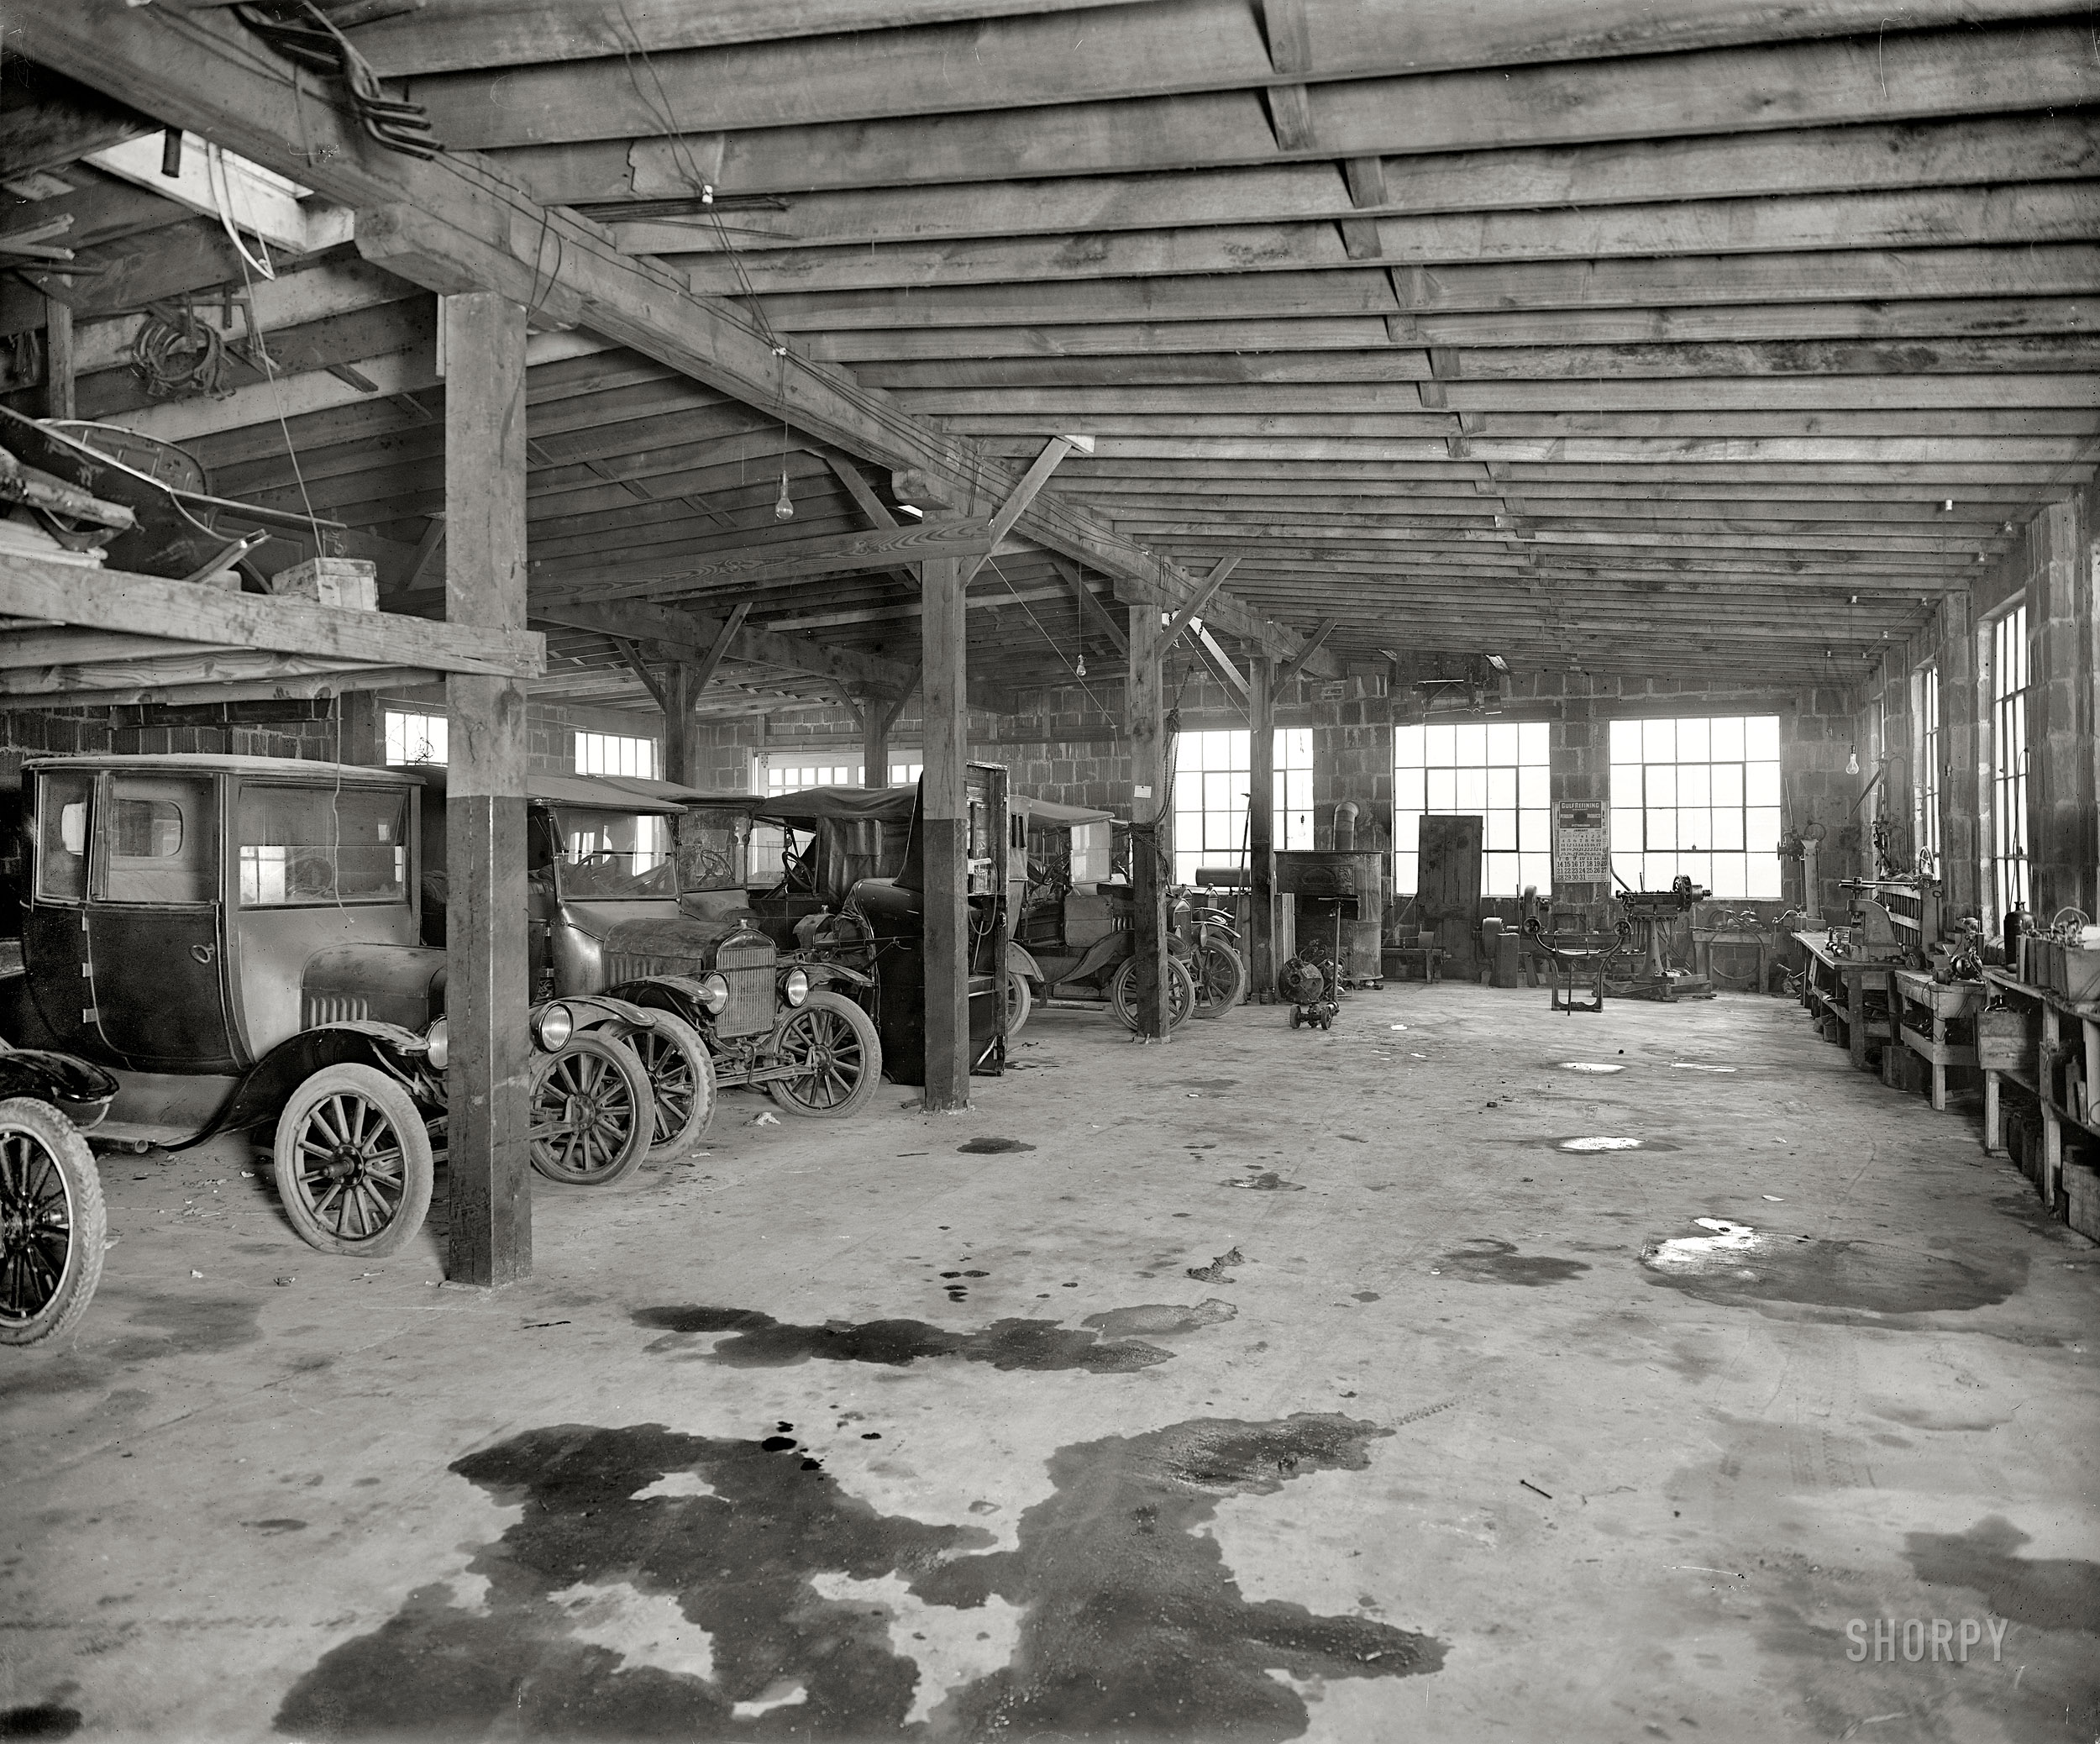 January 1925. Fairfax County, Virginia. "Makely Motor Co., Falls Church." Our second look at this establishment shows a number of Model T Fords in the service garage. National Photo Company Collection glass negative. View full size.